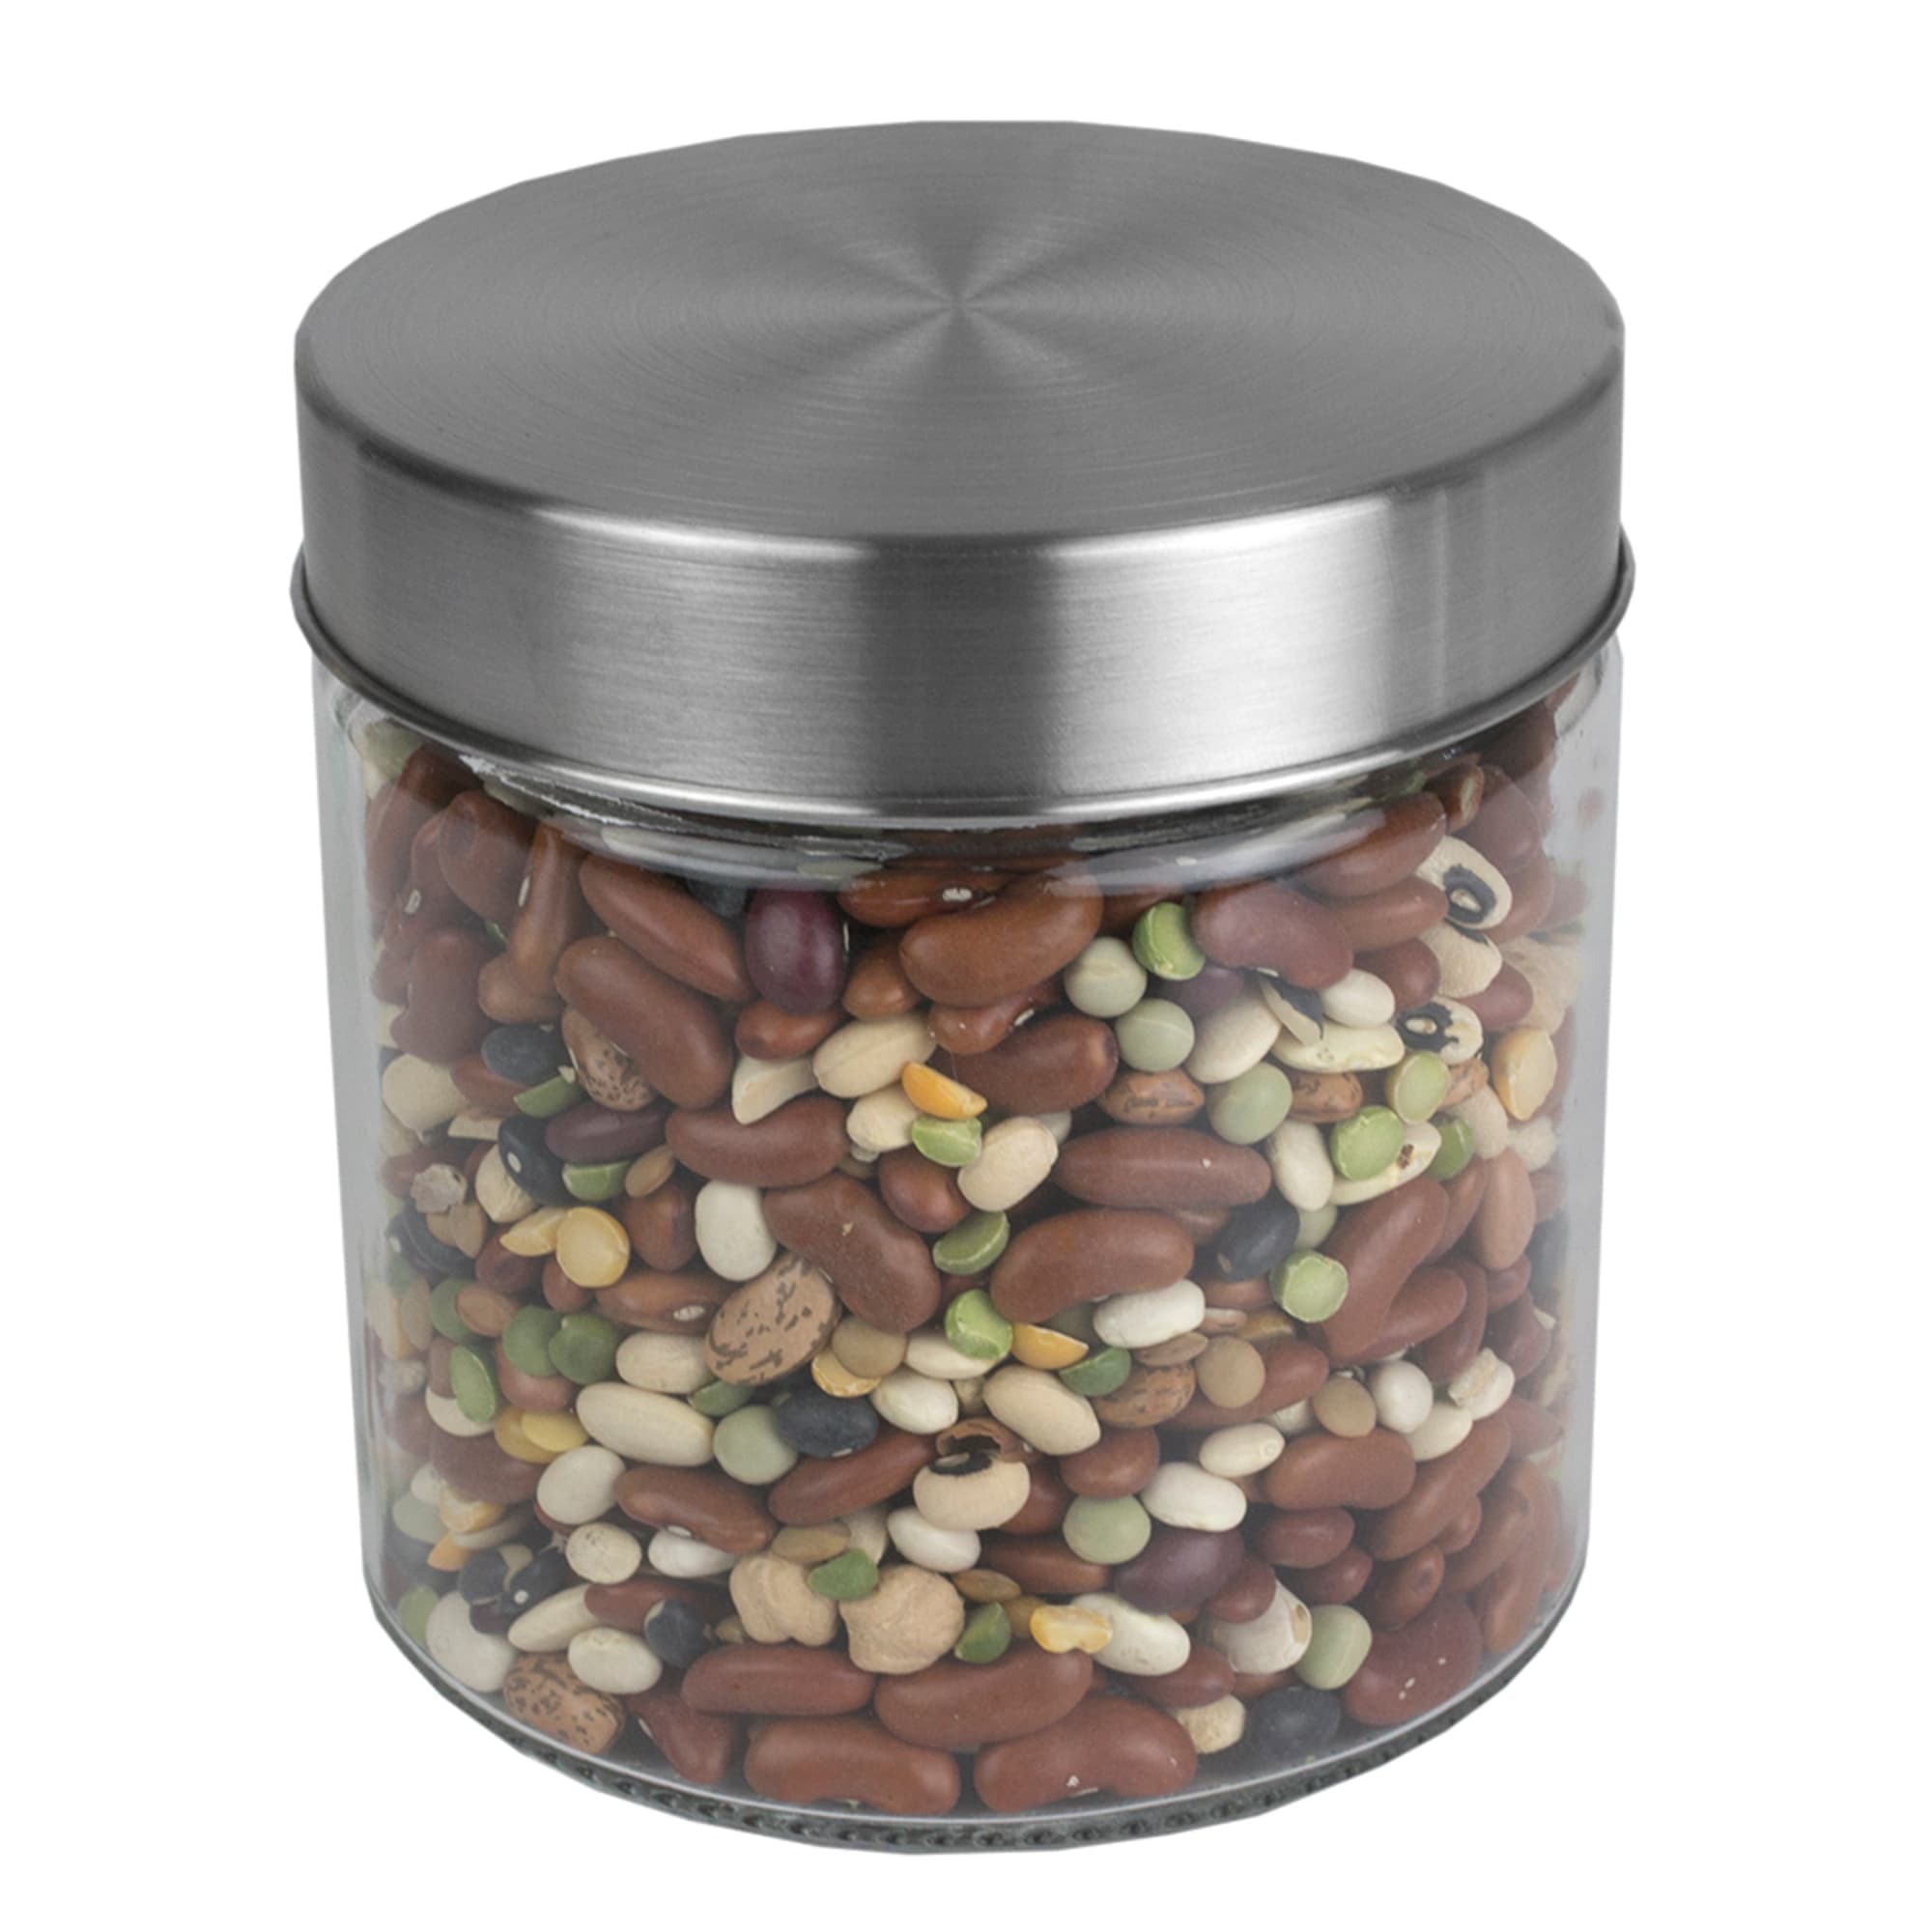 Home Basics 4 Piece Glass Canister Set with Stainless Steel Lids $15.00 EACH, CASE PACK OF 6